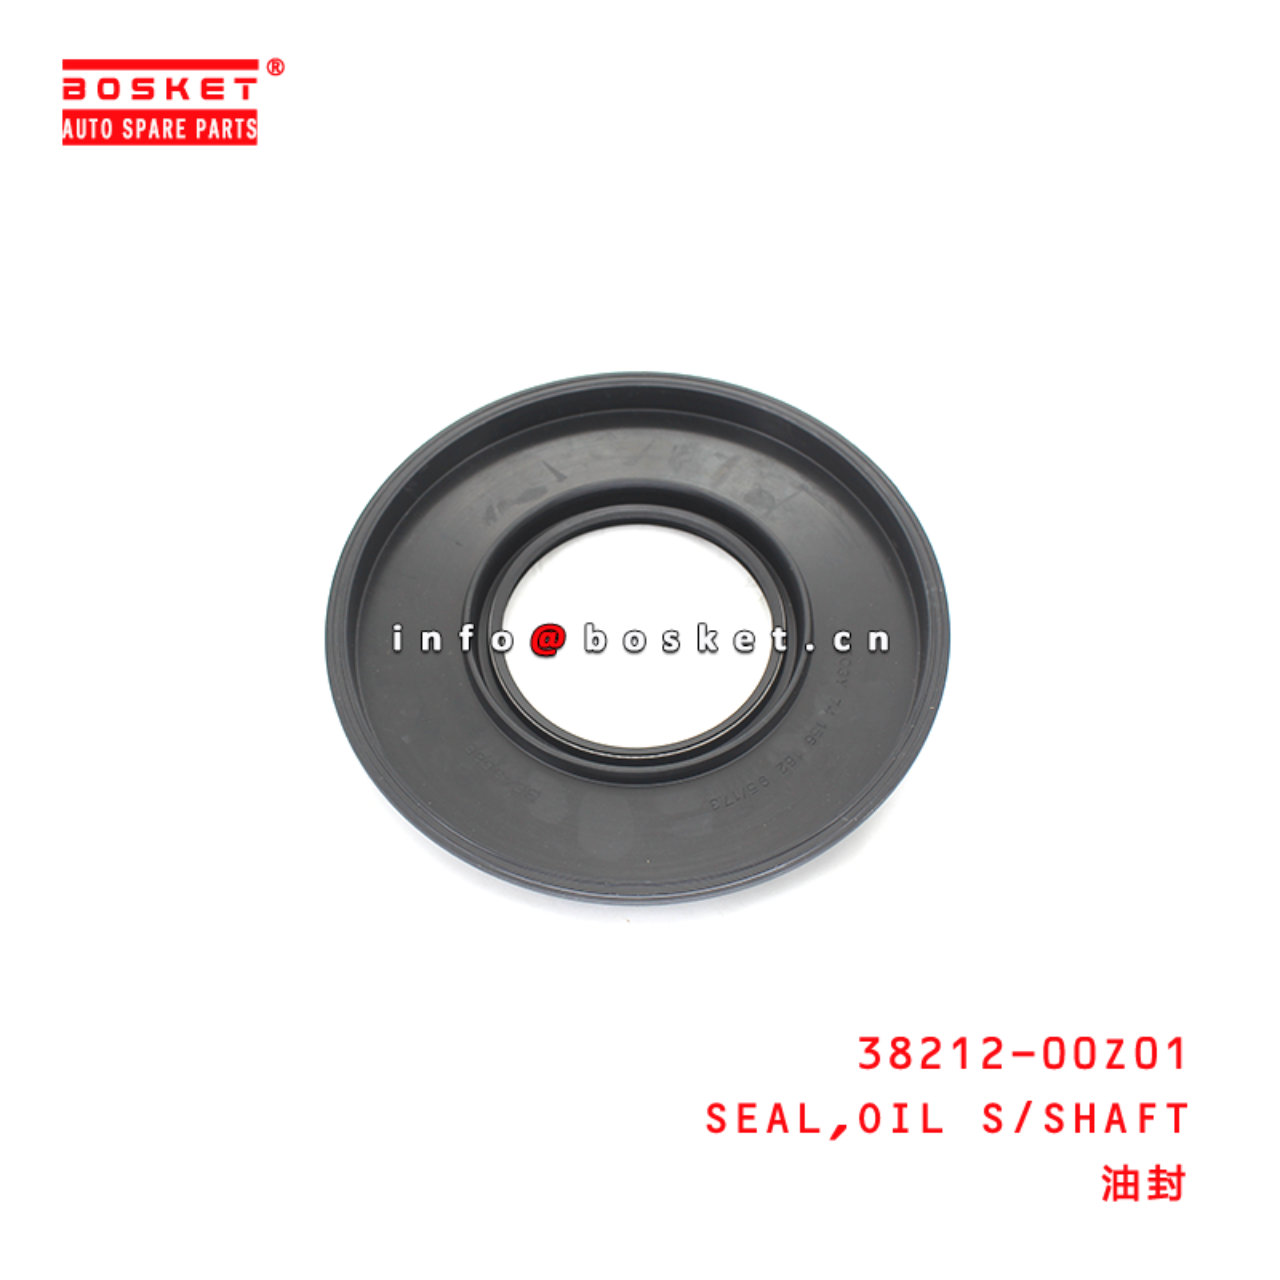 38212-00Z01 Oil S/Shaft Seal Suitable for ISUZU UD NISSAN